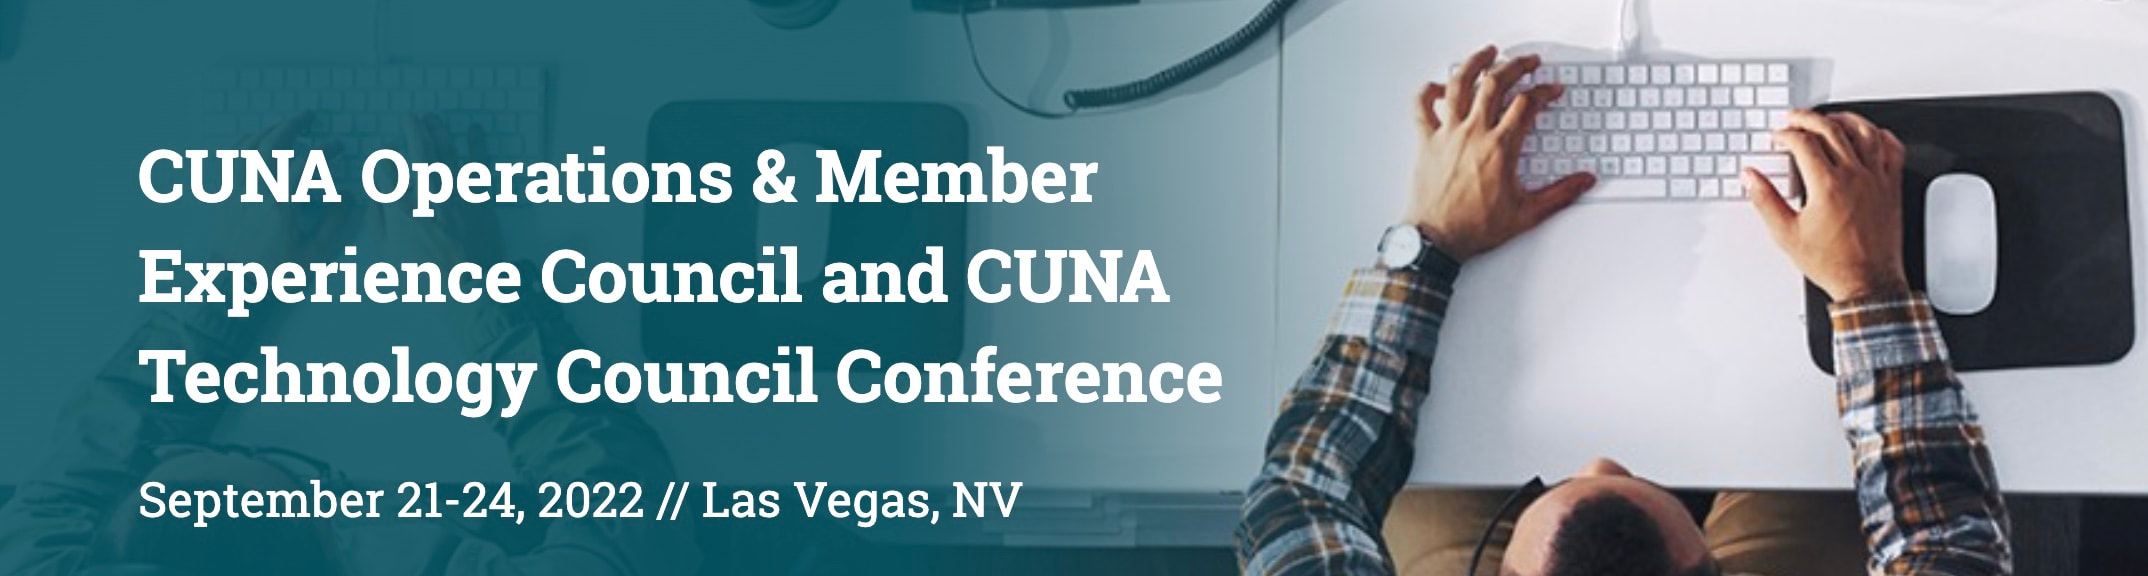 2022 CUNA Technology Council and Operations and Member Experience Council Conference